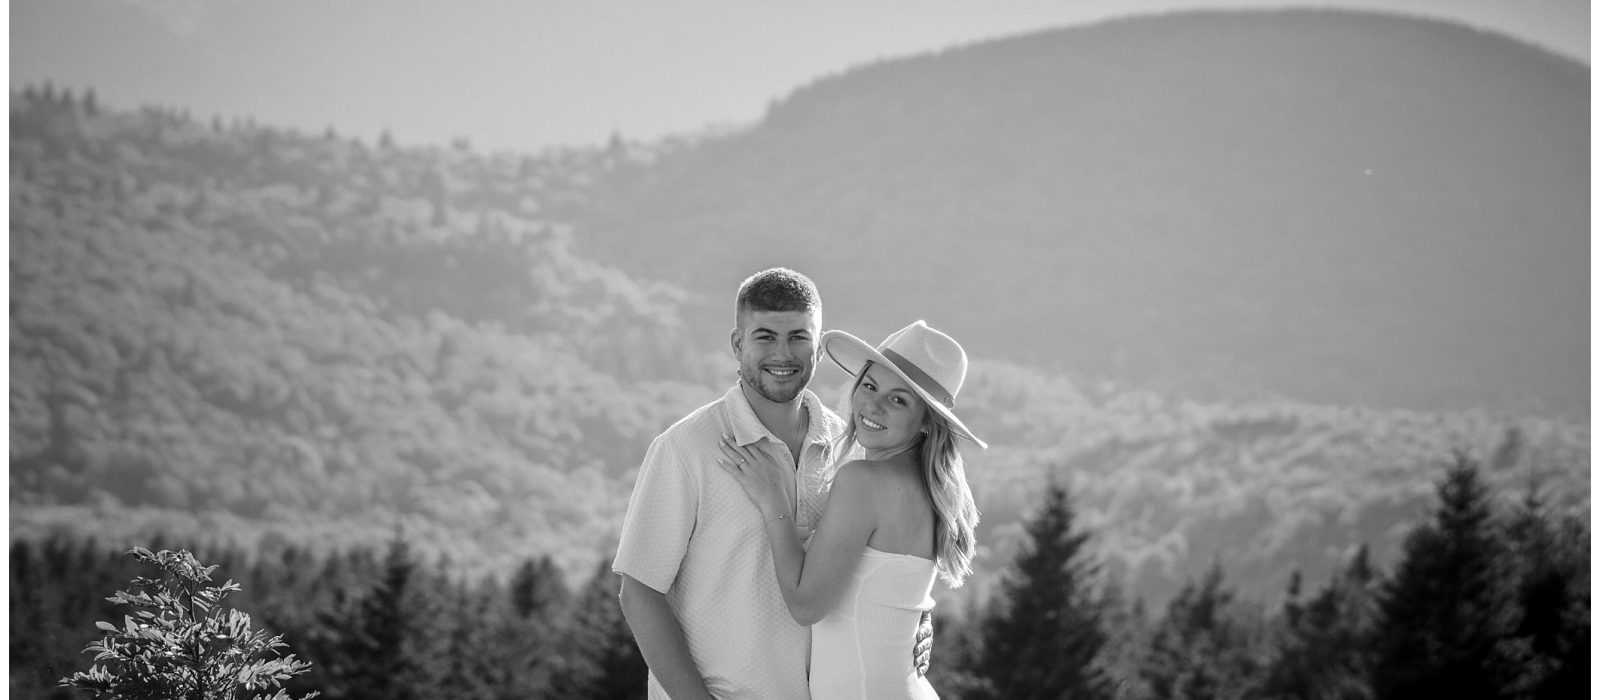 A black and white photo of an engaged couple in the mountains.